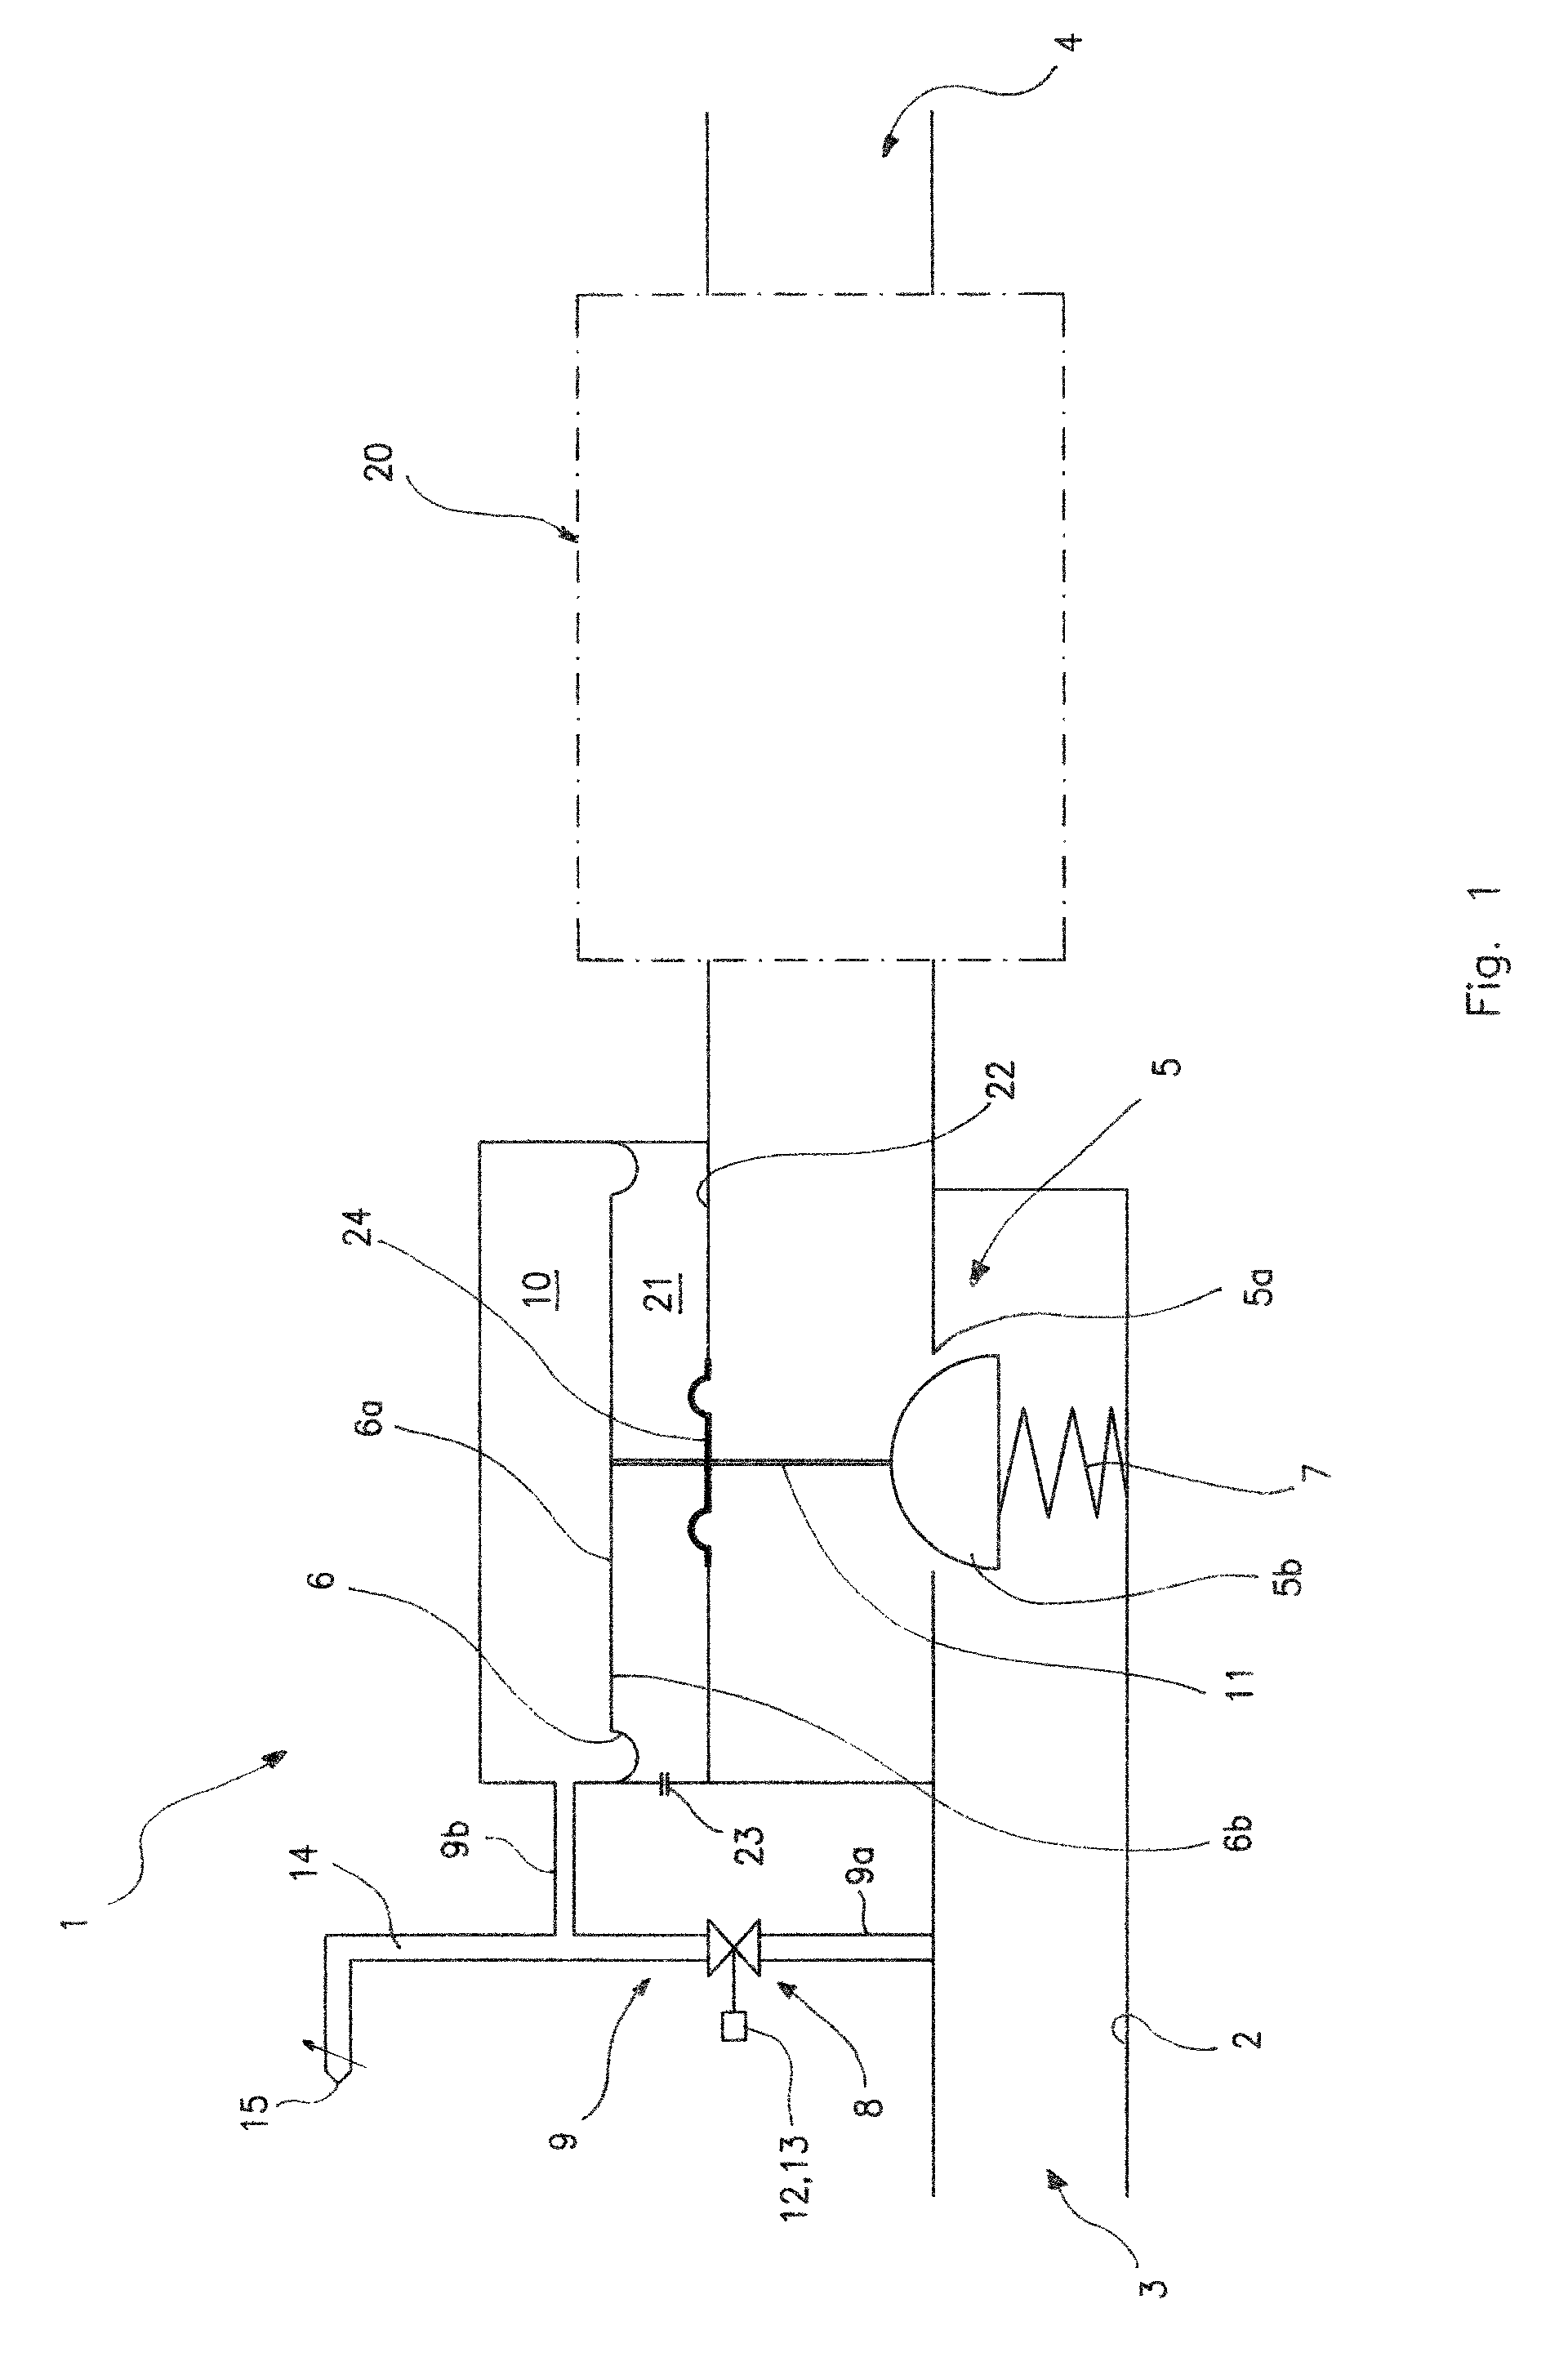 Device for controlling the delivery of a combustible gas to a burner apparatus